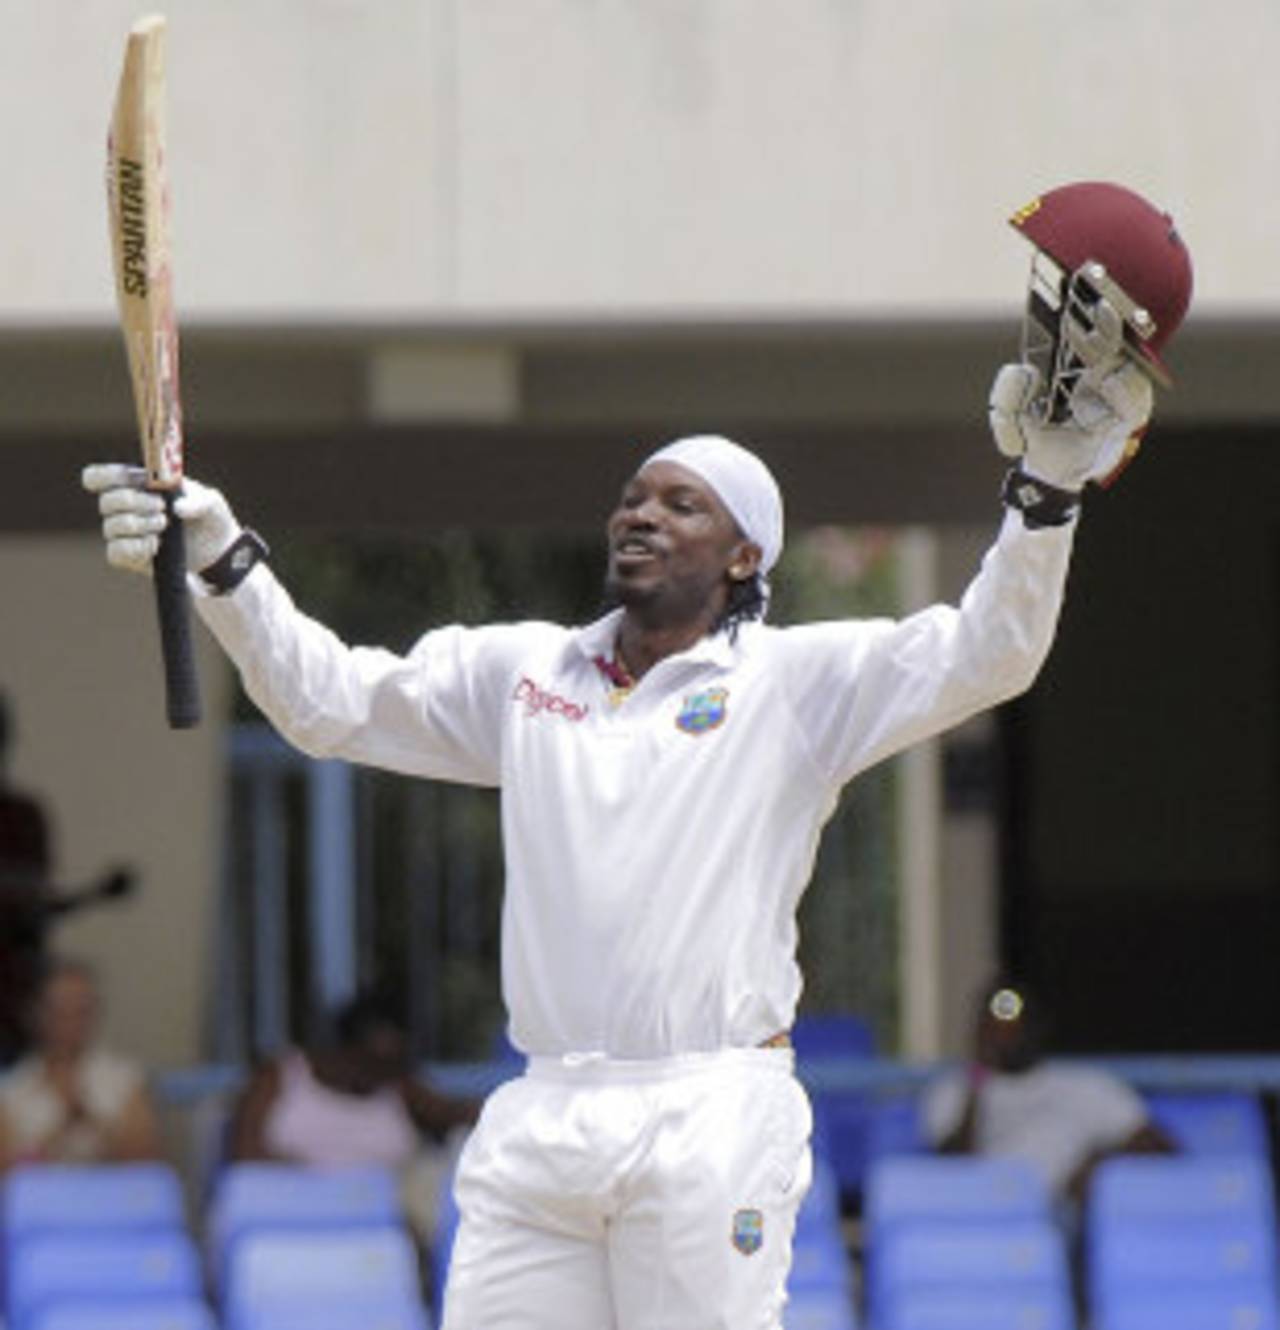 Chris Gayle celebrates his century in his first innings after returning to the West Indies side&nbsp;&nbsp;&bull;&nbsp;&nbsp;DigicelCricket.com/Brooks LaTouche Photography